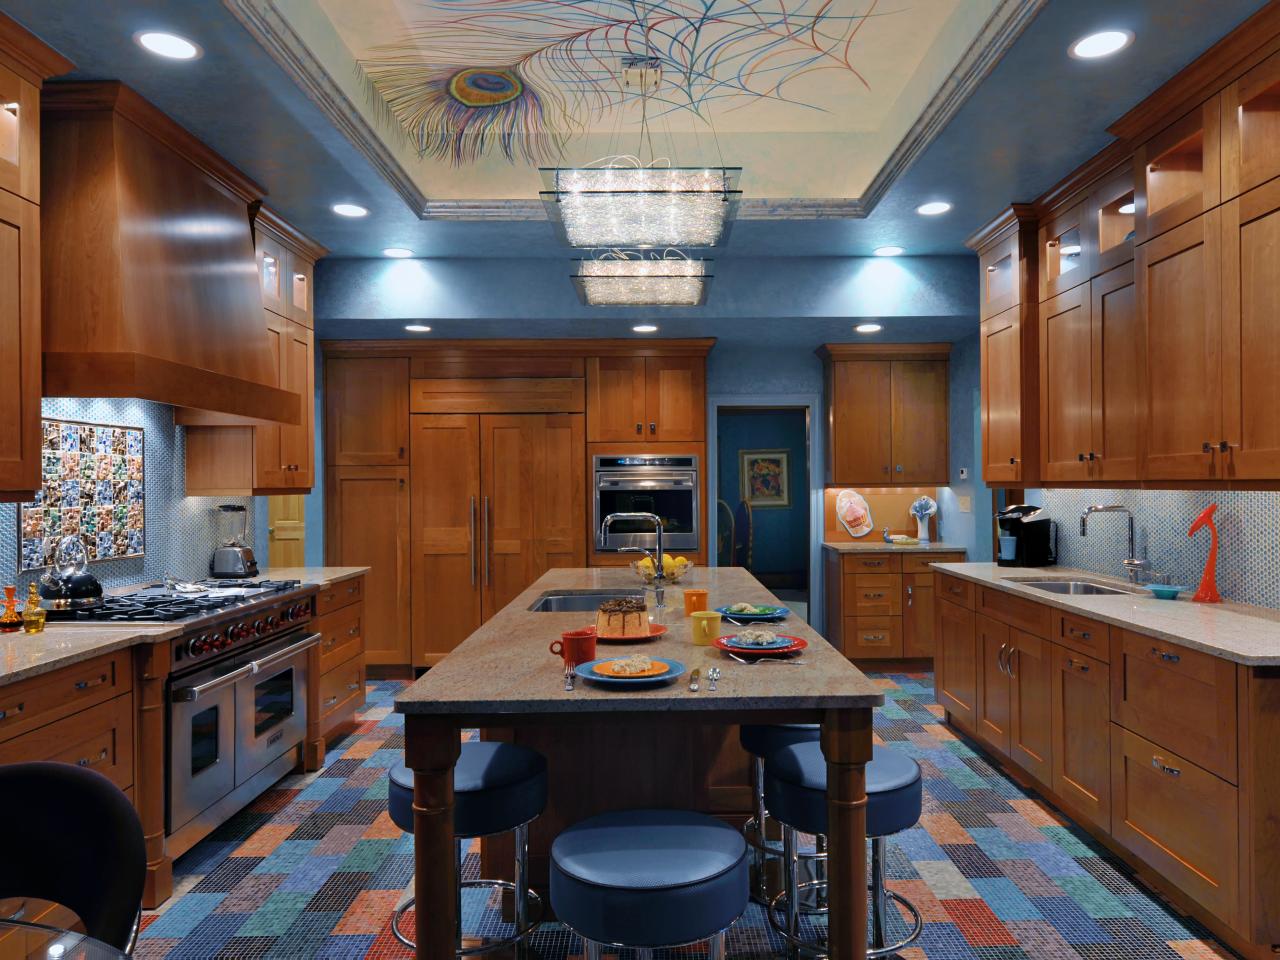 Painting Kitchen Ceilings Pictures, Ideas & Tips From HGTV HGTV